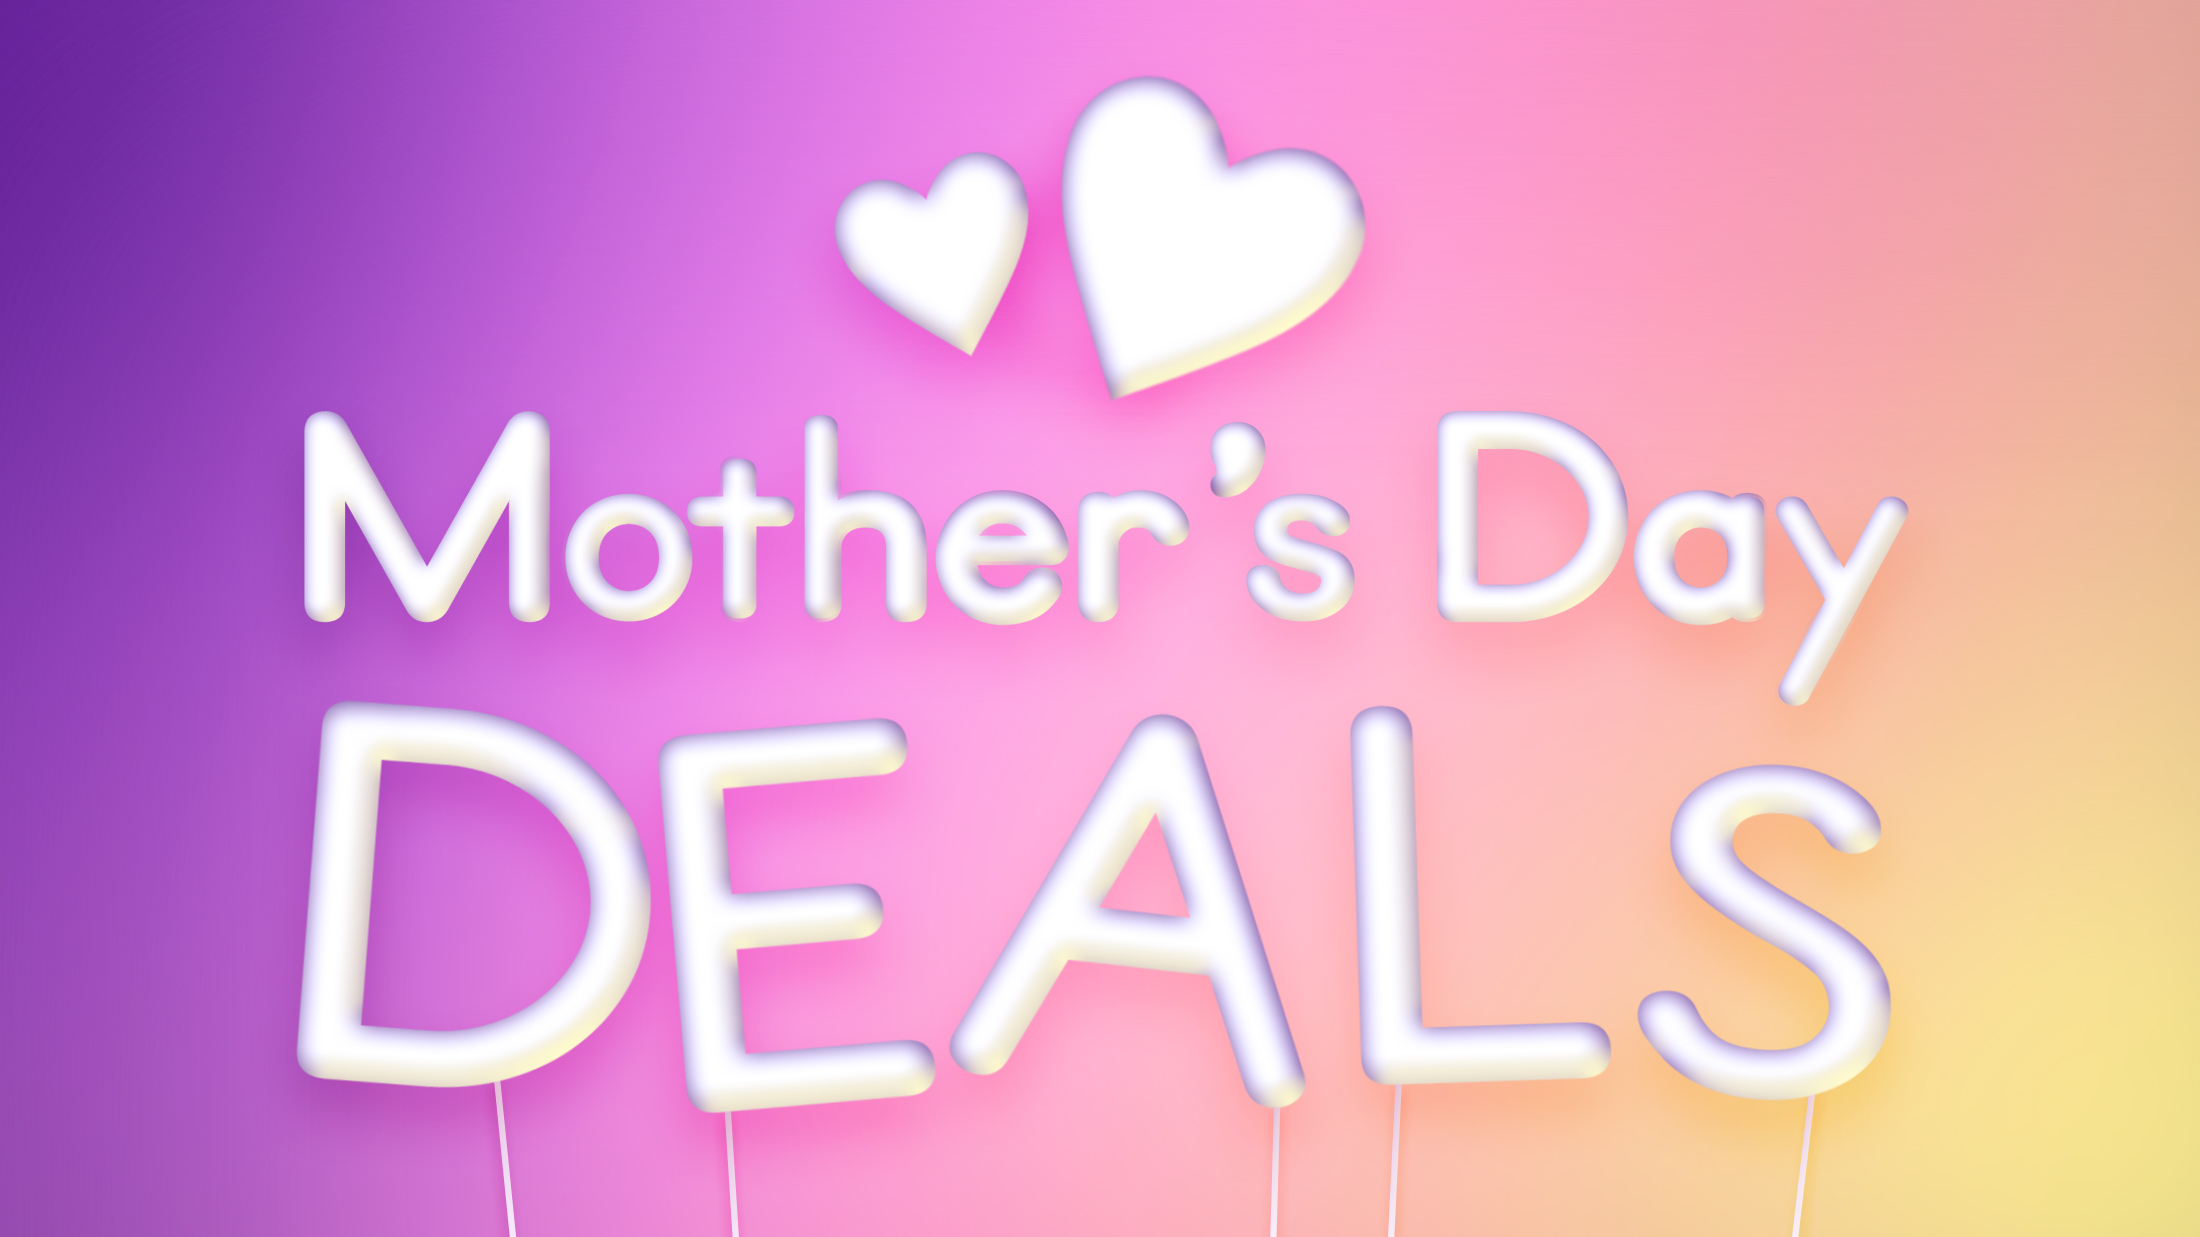 Mother's Day Deals: Save on iPhone 13 Pro, Apple Accessories, iPad Keyboards, More